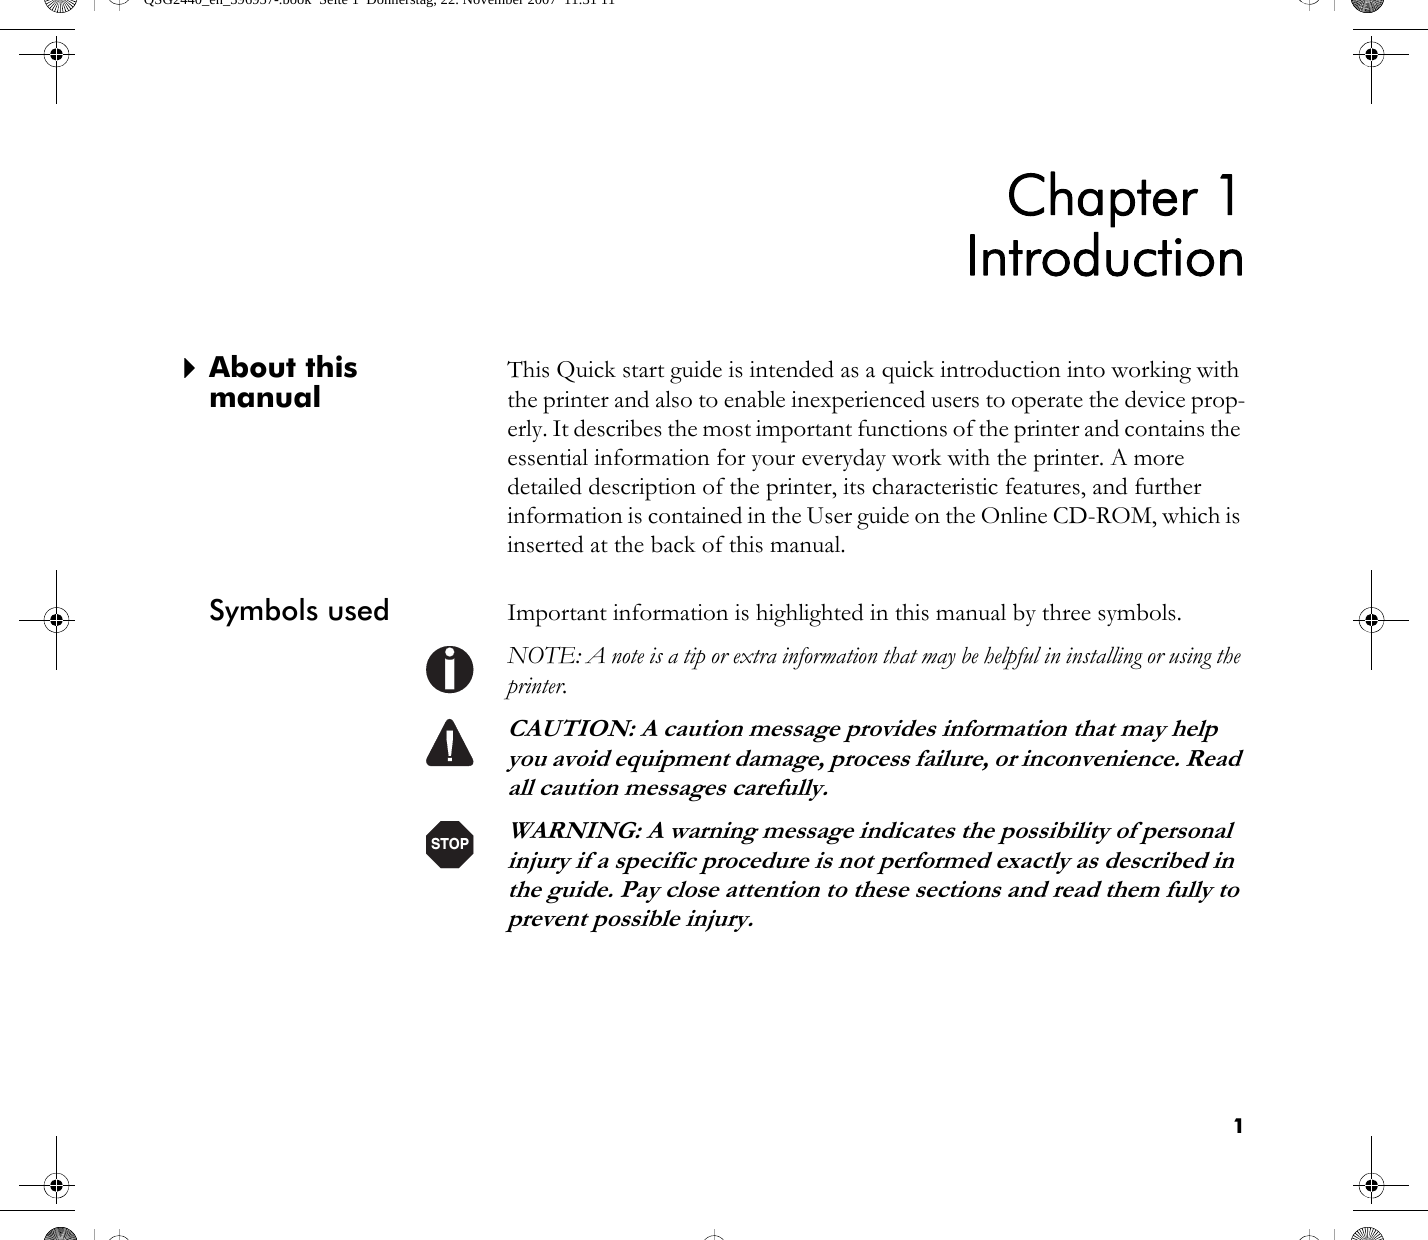 1Chapter 1Introduction`About this manualThis Quick start guide is intended as a quick introduction into working with the printer and also to enable inexperienced users to operate the device prop-erly. It describes the most important functions of the printer and contains the essential information for your everyday work with the printer. A more detailed description of the printer, its characteristic features, and further information is contained in the User guide on the Online CD-ROM, which is inserted at the back of this manual.Symbols used Important information is highlighted in this manual by three symbols.NOTE: A note is a tip or extra information that may be helpful in installing or using the printer.CAUTION: A caution message provides information that may help you avoid equipment damage, process failure, or inconvenience. Read all caution messages carefully.WARNING: A warning message indicates the possibility of personal injury if a specific procedure is not performed exactly as described in the guide. Pay close attention to these sections and read them fully to prevent possible injury.STOPQSG2440_en_396957-.book  Seite 1  Donnerstag, 22. November 2007  11:31 11